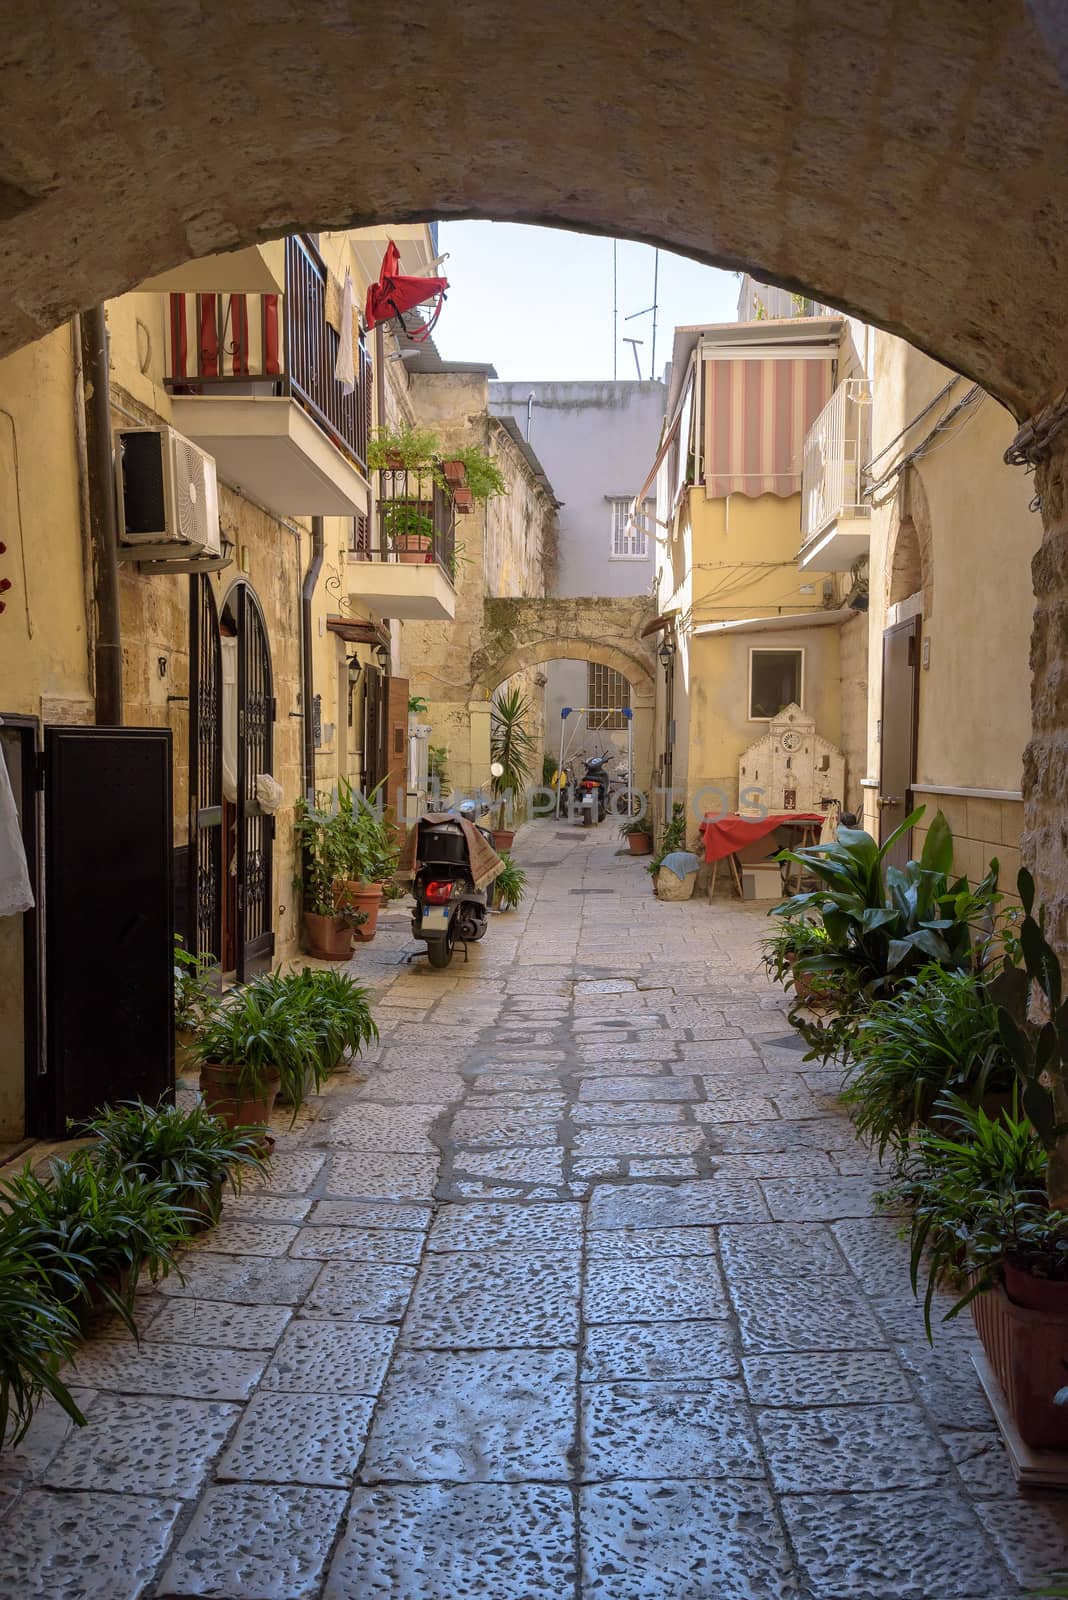 Backyard in the old town of Bari by mkos83